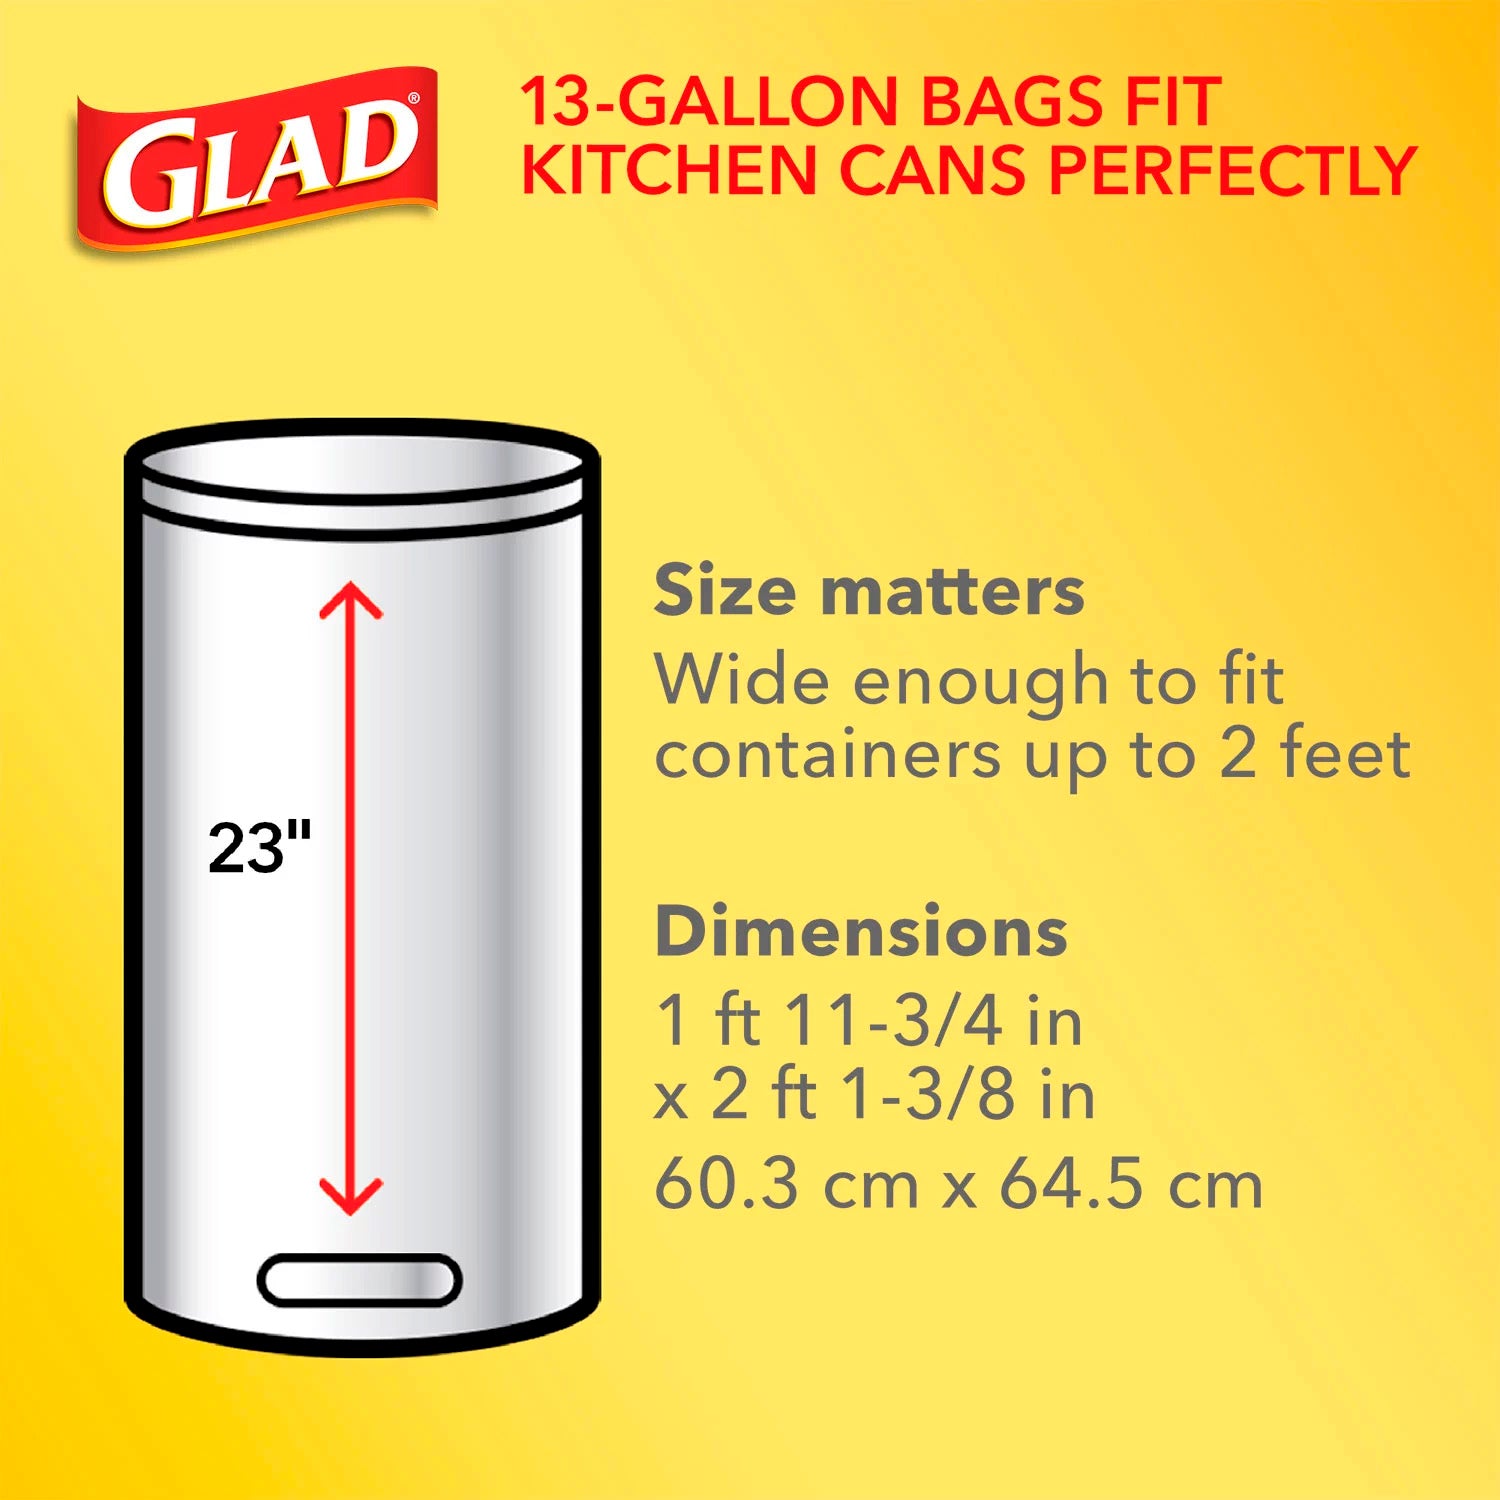 Force Flex Garbage Bags by Glad, 13 Gallon